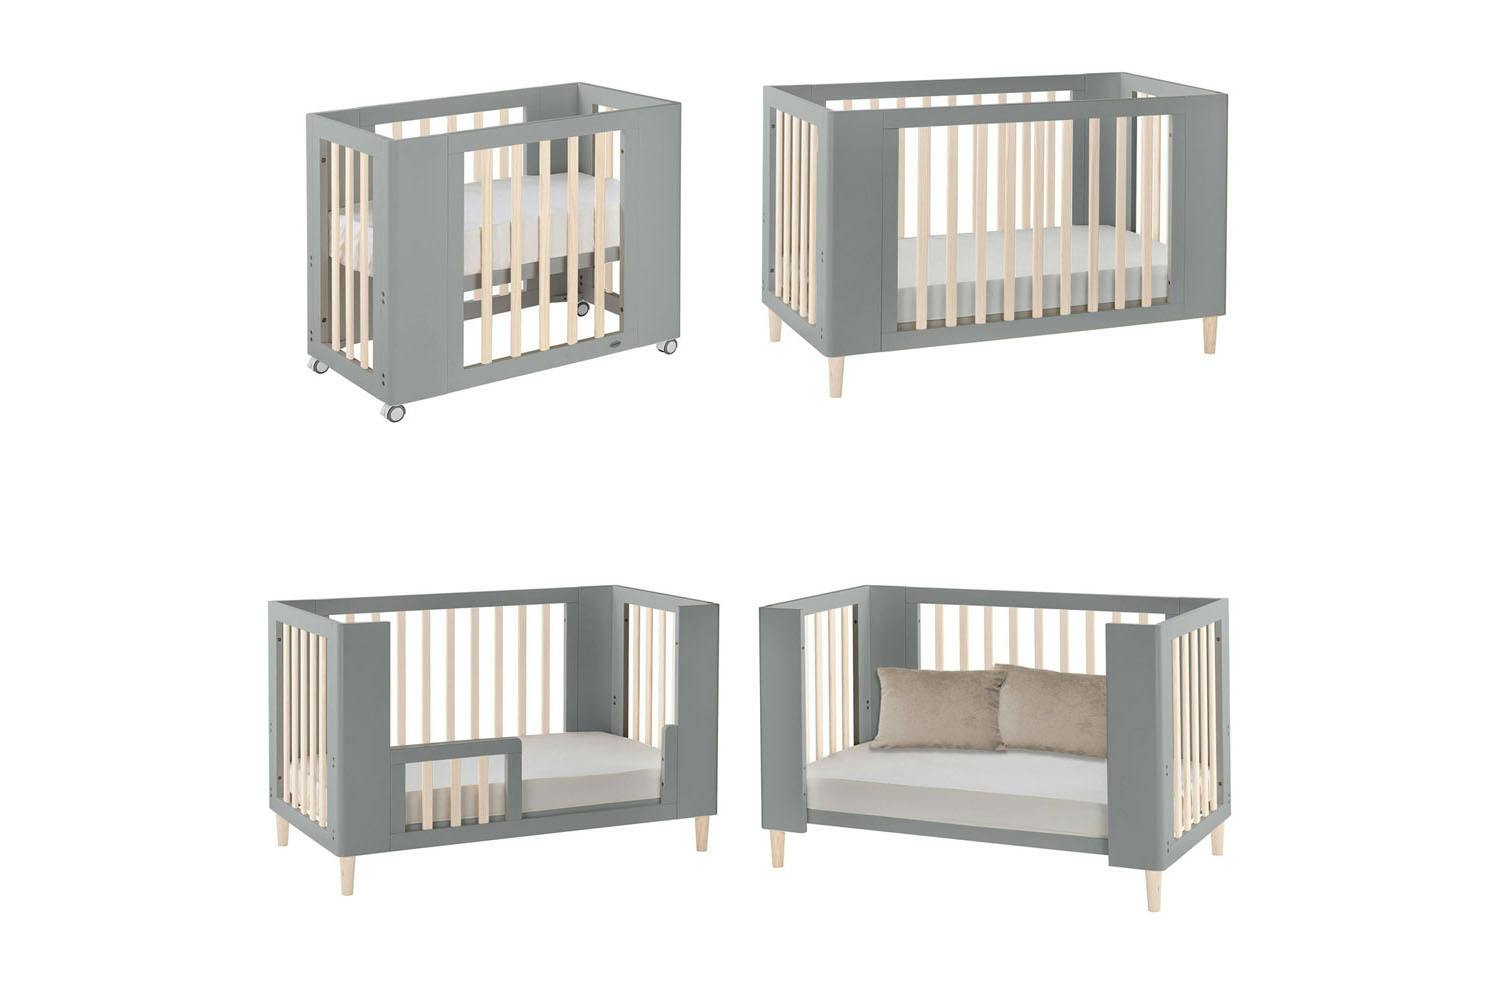 Cocoon Evoke 4 in 1 Crib, Cot Bed, Toddler Bed & Sofa | Dove Grey/Natural Wash